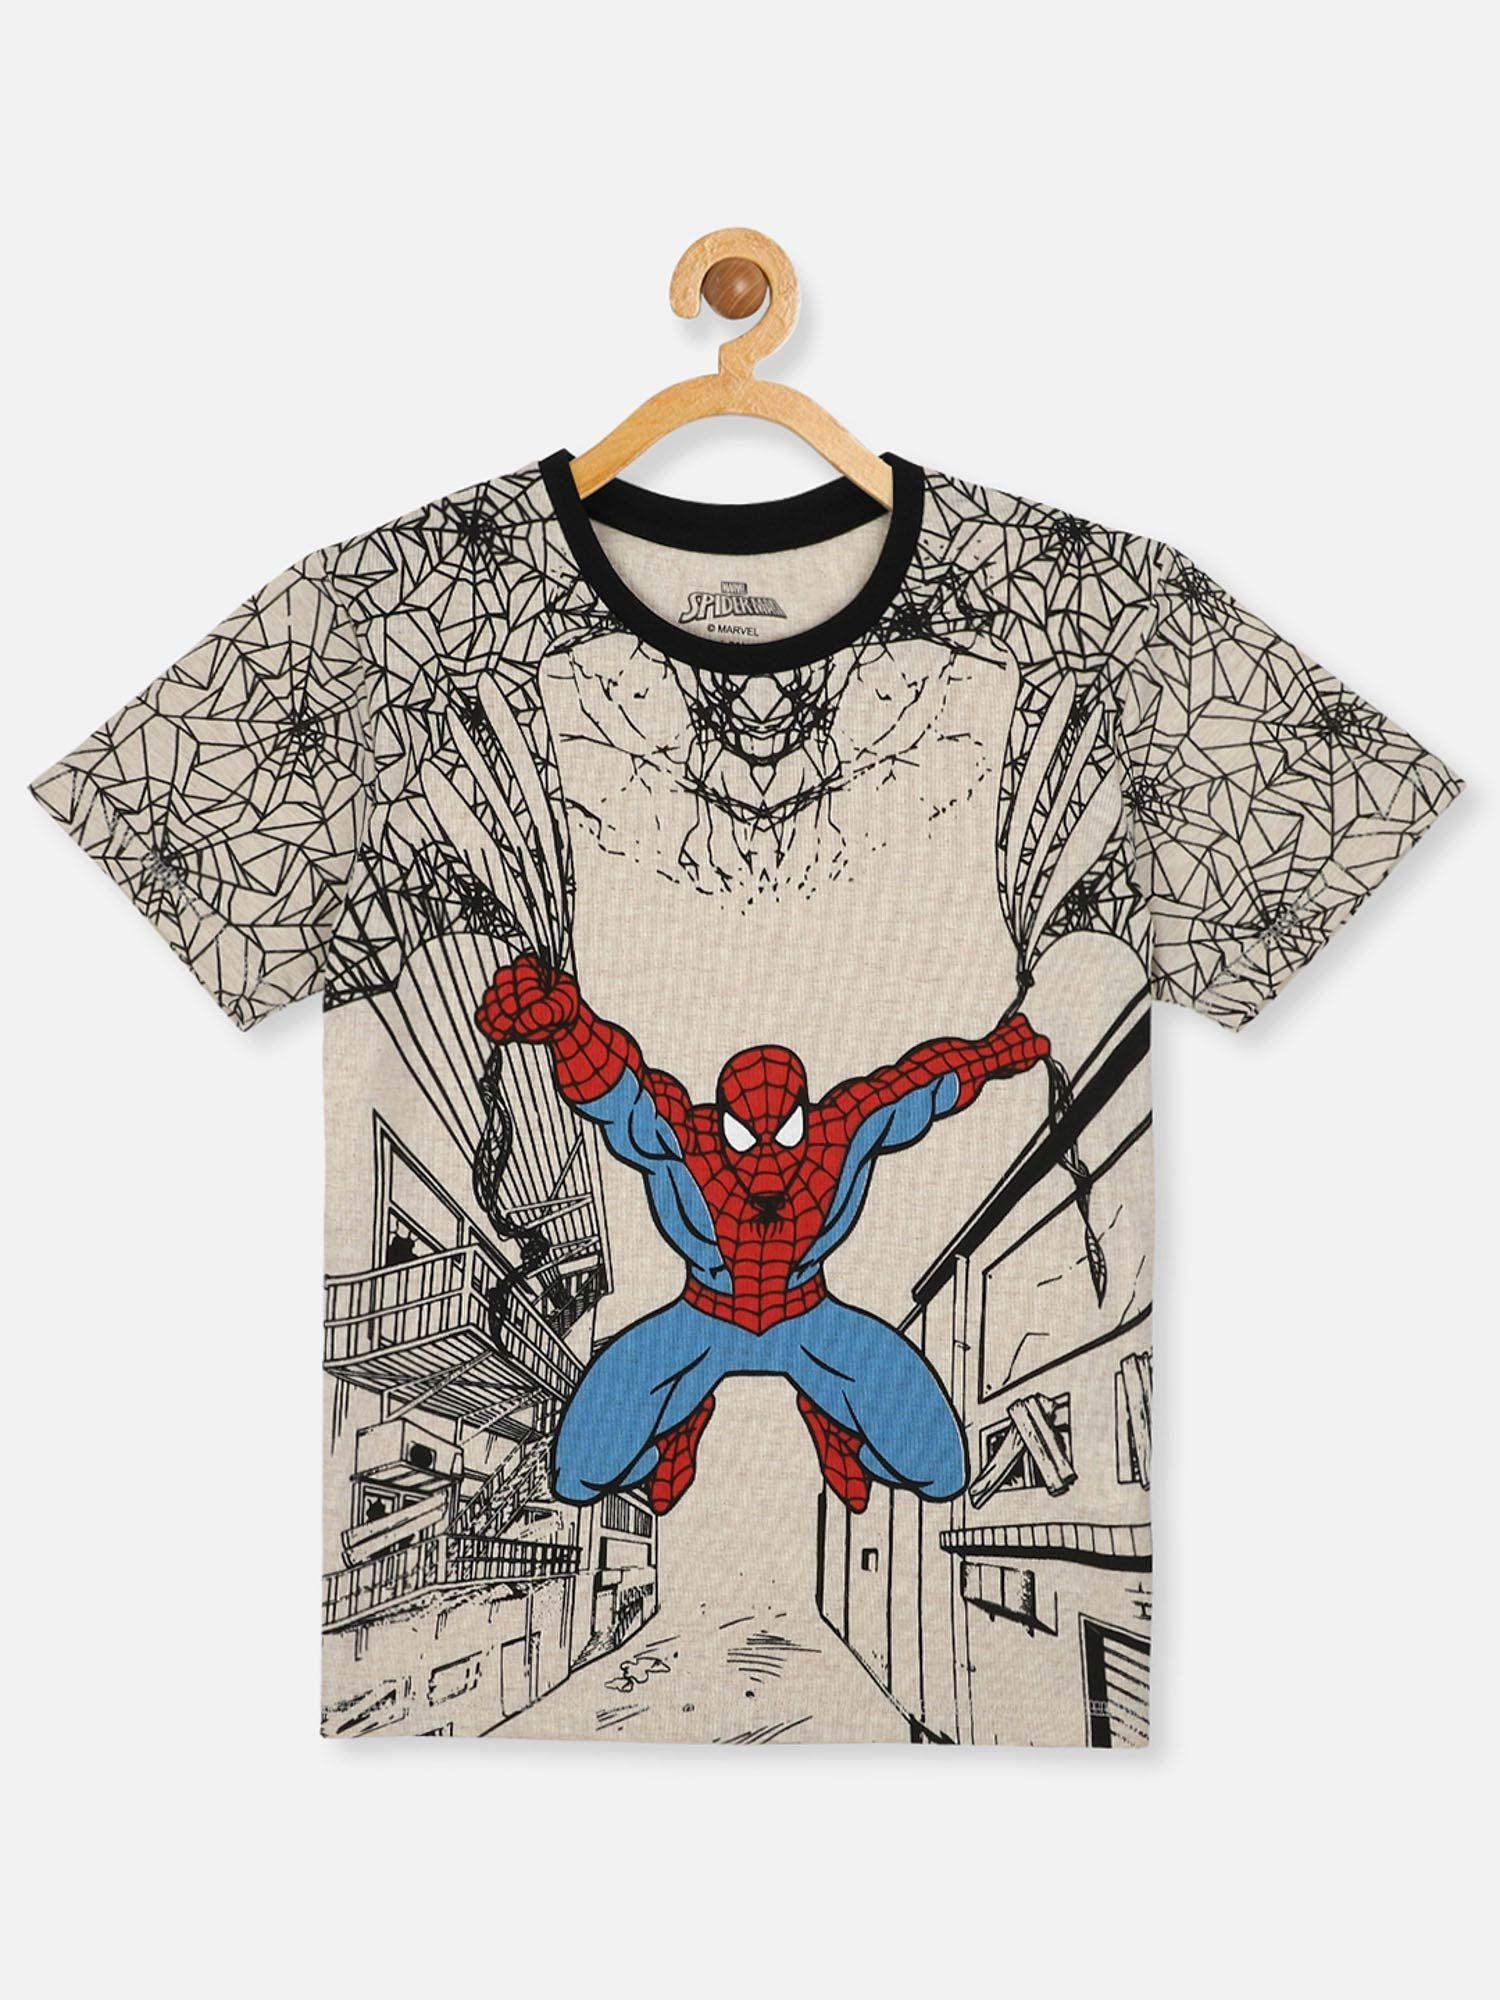 spiderman featured t-shirt for boys